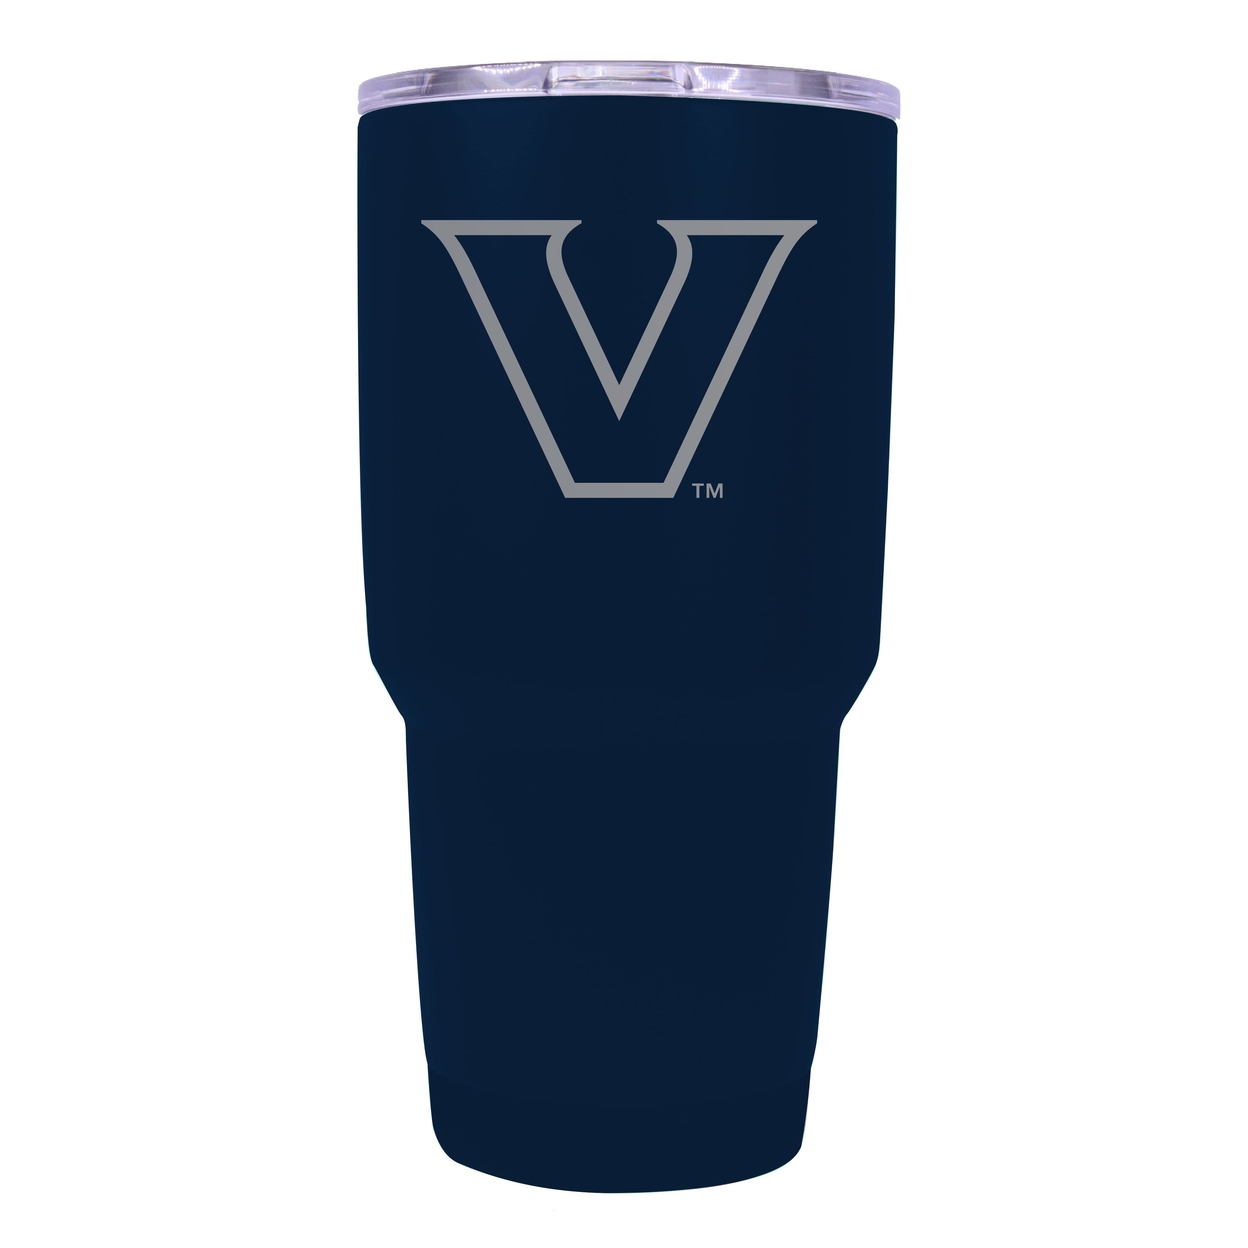 Winthrop University 24 Oz Laser Engraved Stainless Steel Insulated Tumbler - Choose Your Color. - Seafoam